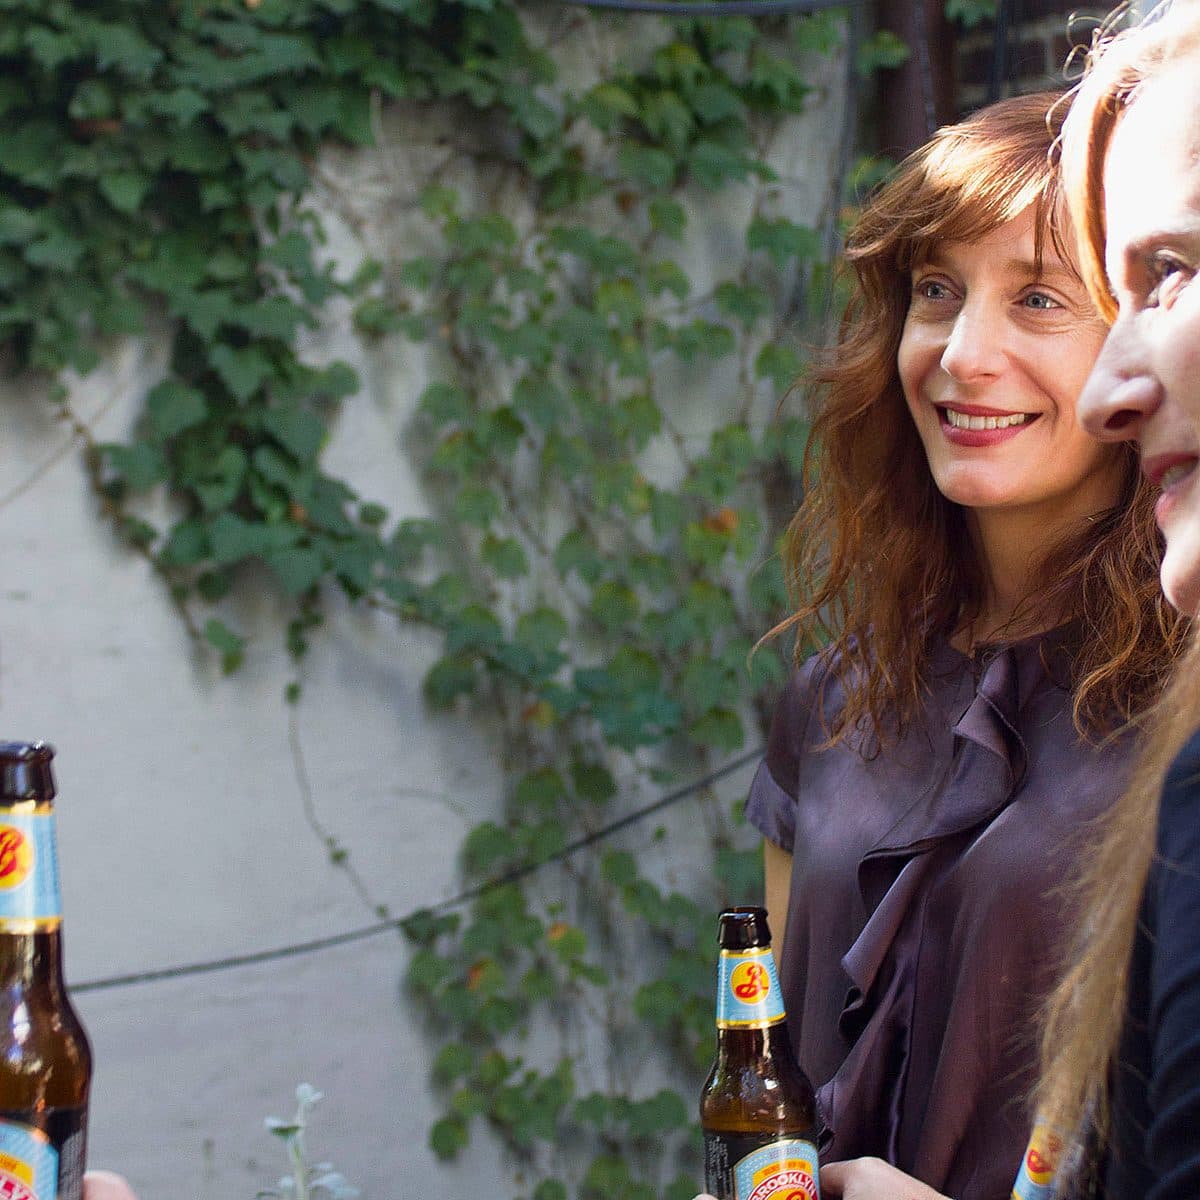 Two women are smiling and holding beer bottles, engaging in conversation outdoors. One woman has long wavy hair and wears a dark top, while the other has long straight hair. The background features a wall covered in ivy and greenery.